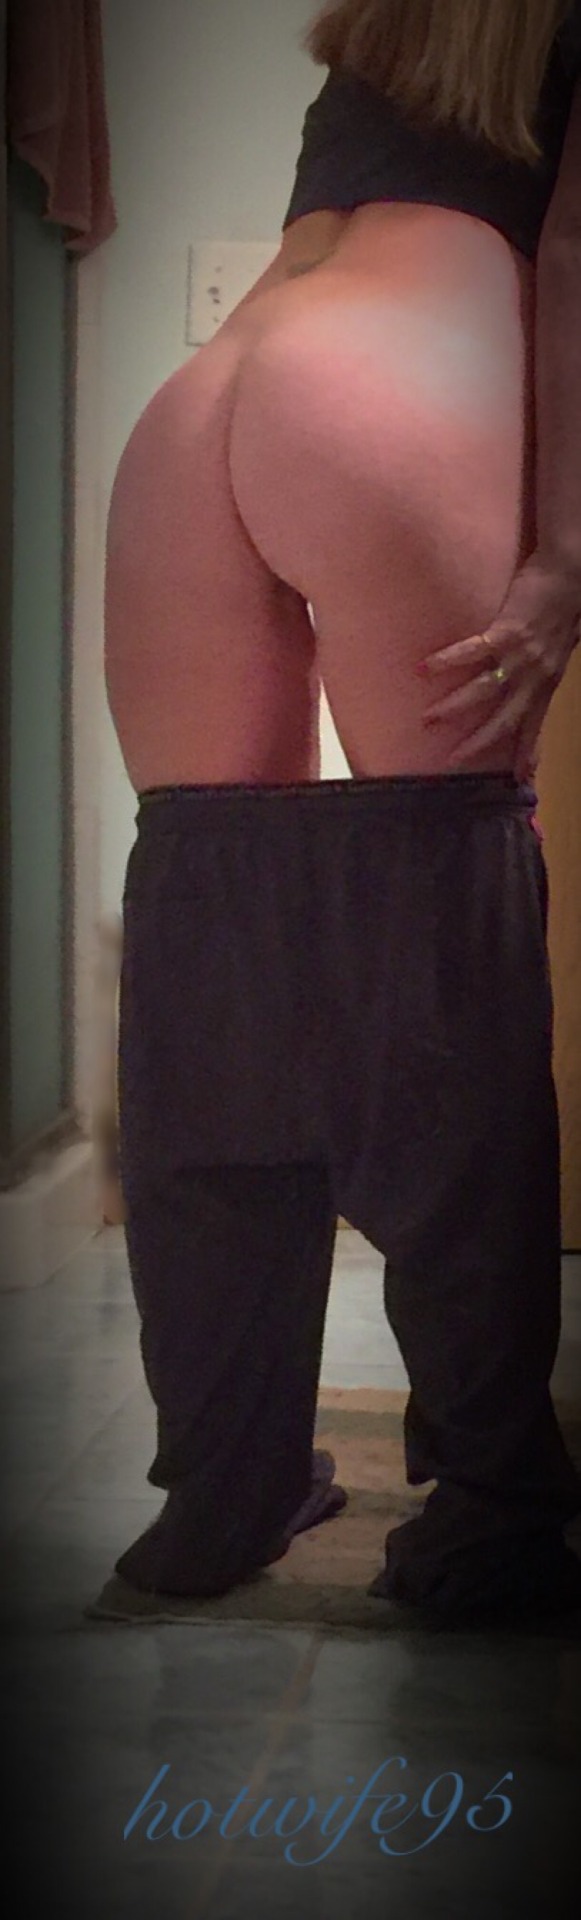 hotwife95:  Happy Hump Day! Iâ€™ve decided all natural is best for tonightâ€™s